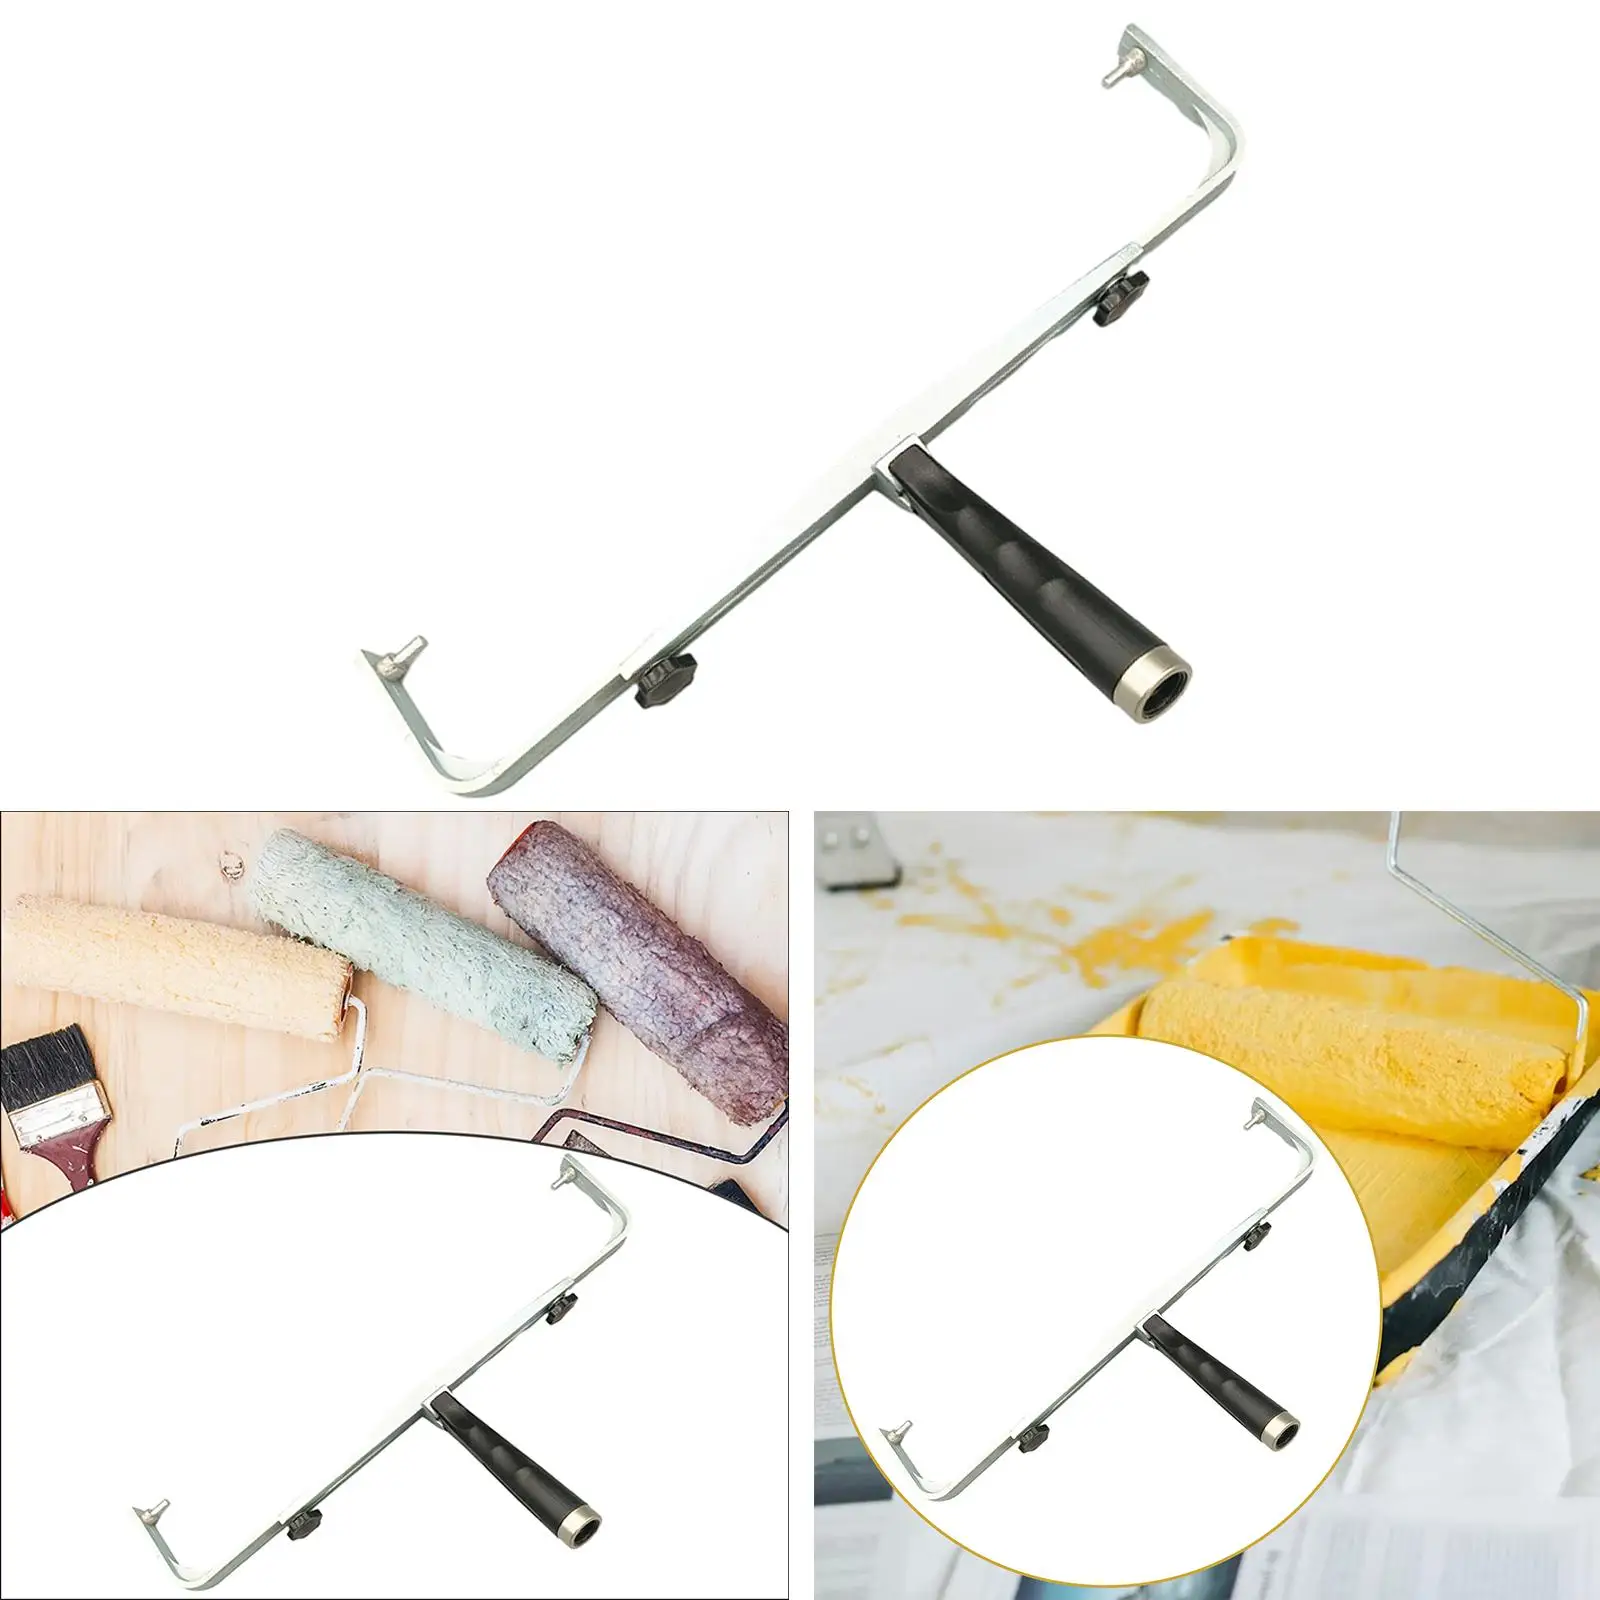 45cm Paint Roller Frame Replacements Sturdy Adjustable Heavy Duty Accessory for Home Finishing and Improvement Versatile